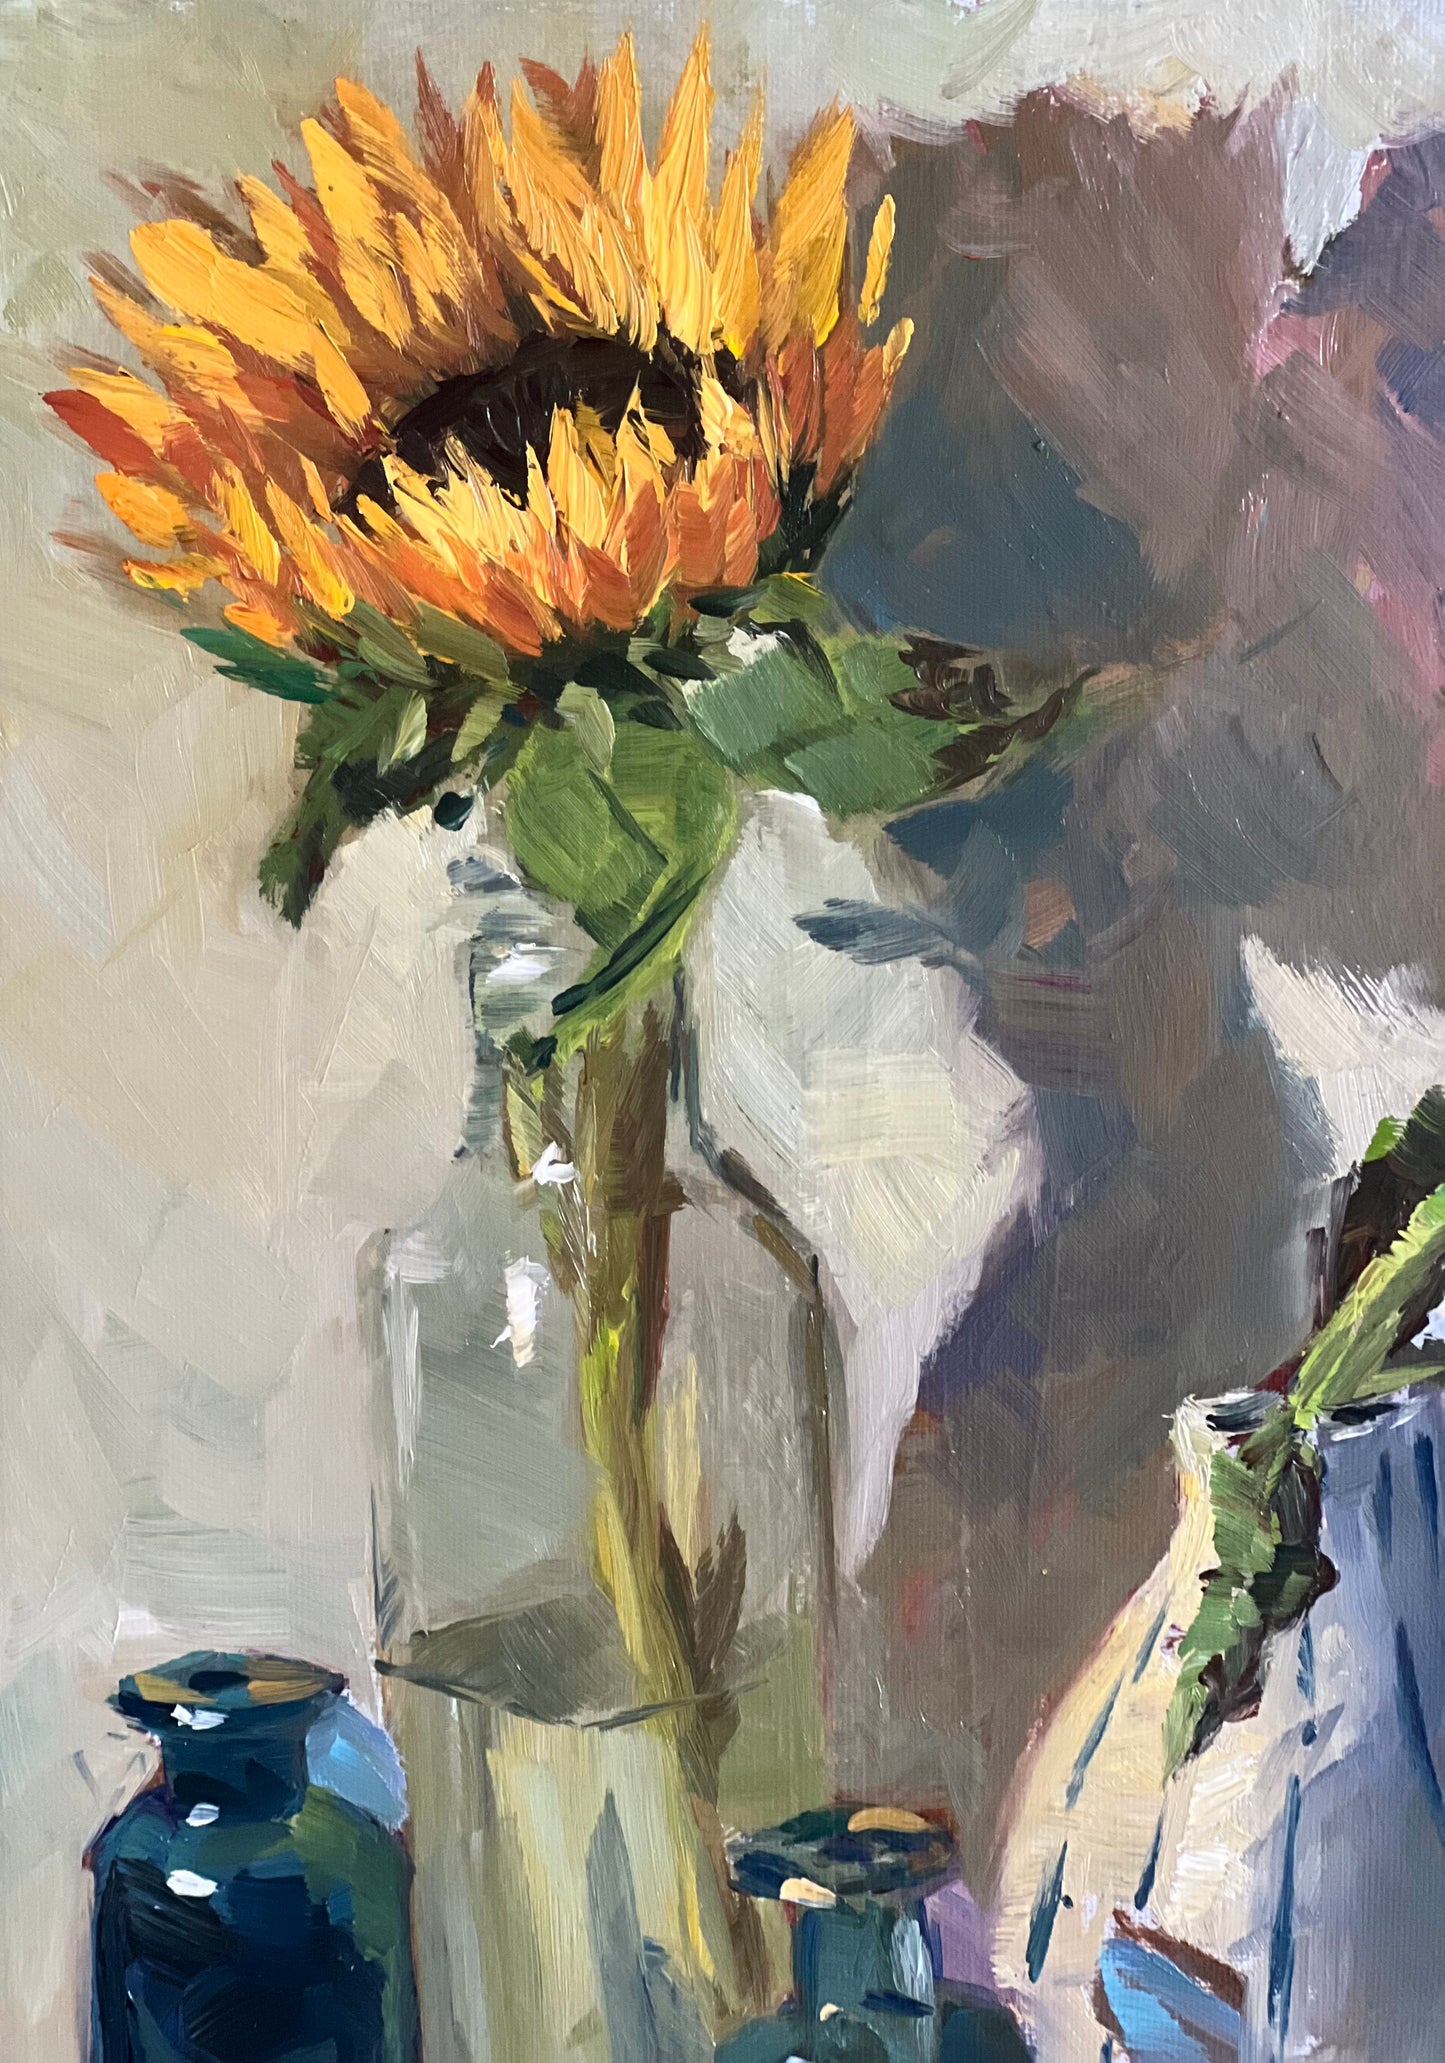 Sunflower Series 11 - Original Stilllife Painting, 8 by 12 inches